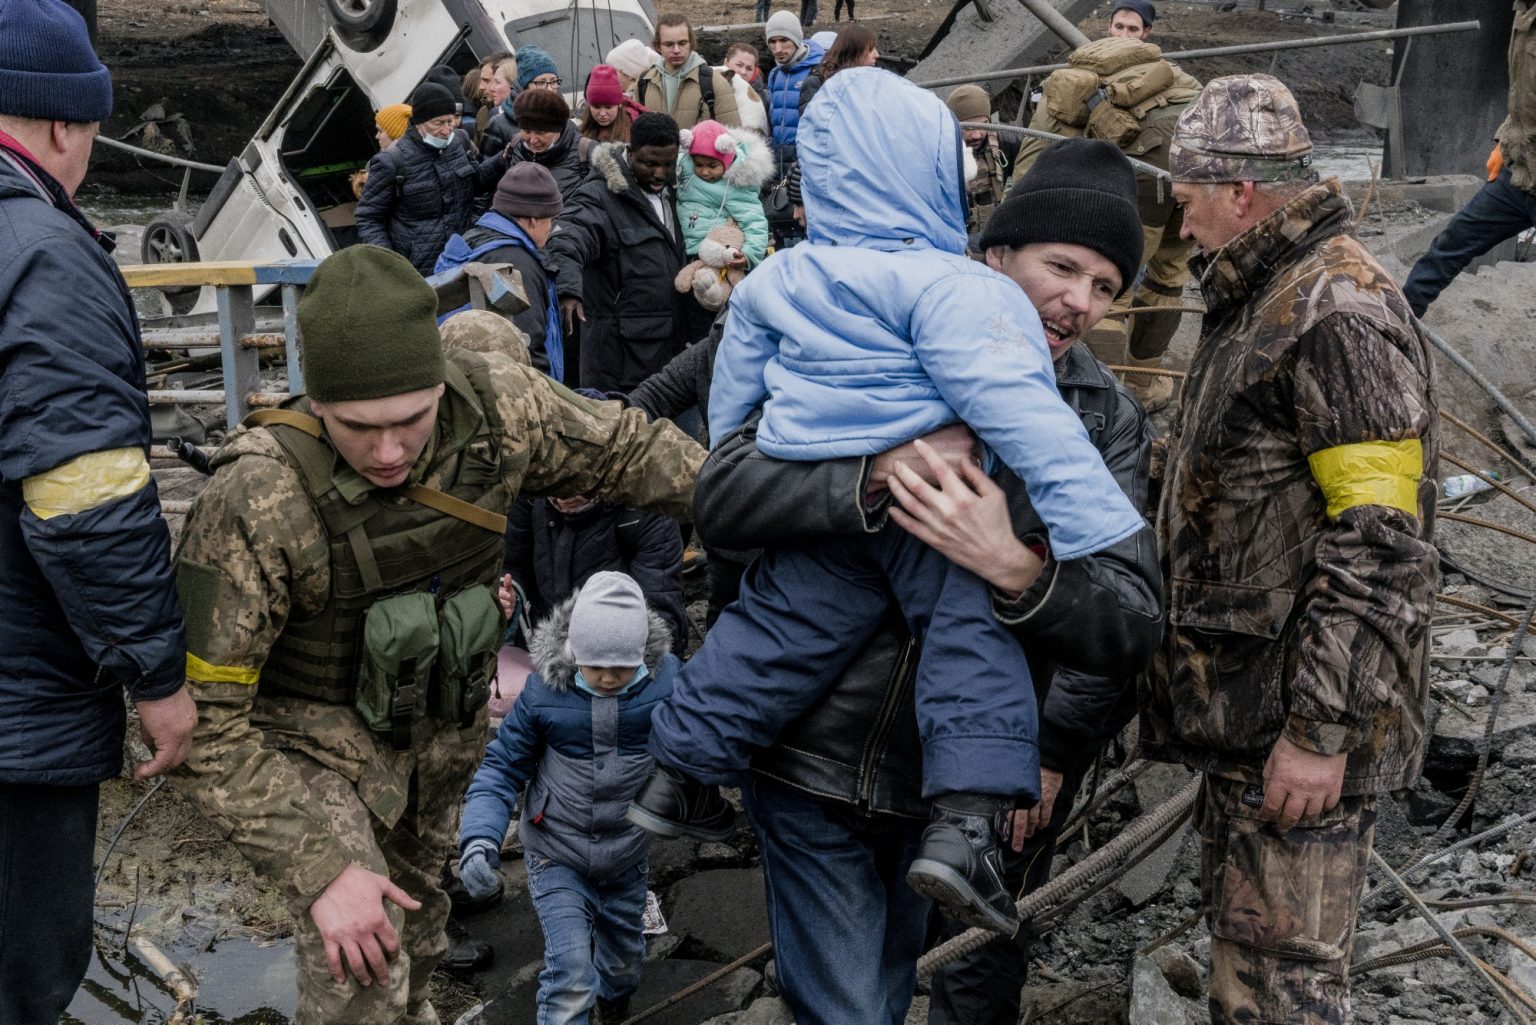 UKRAINE, Kyiv. March 05, 2022 - People cross a destroyed bridge as they try to leave the city of Irpin, in the Kyiv region.